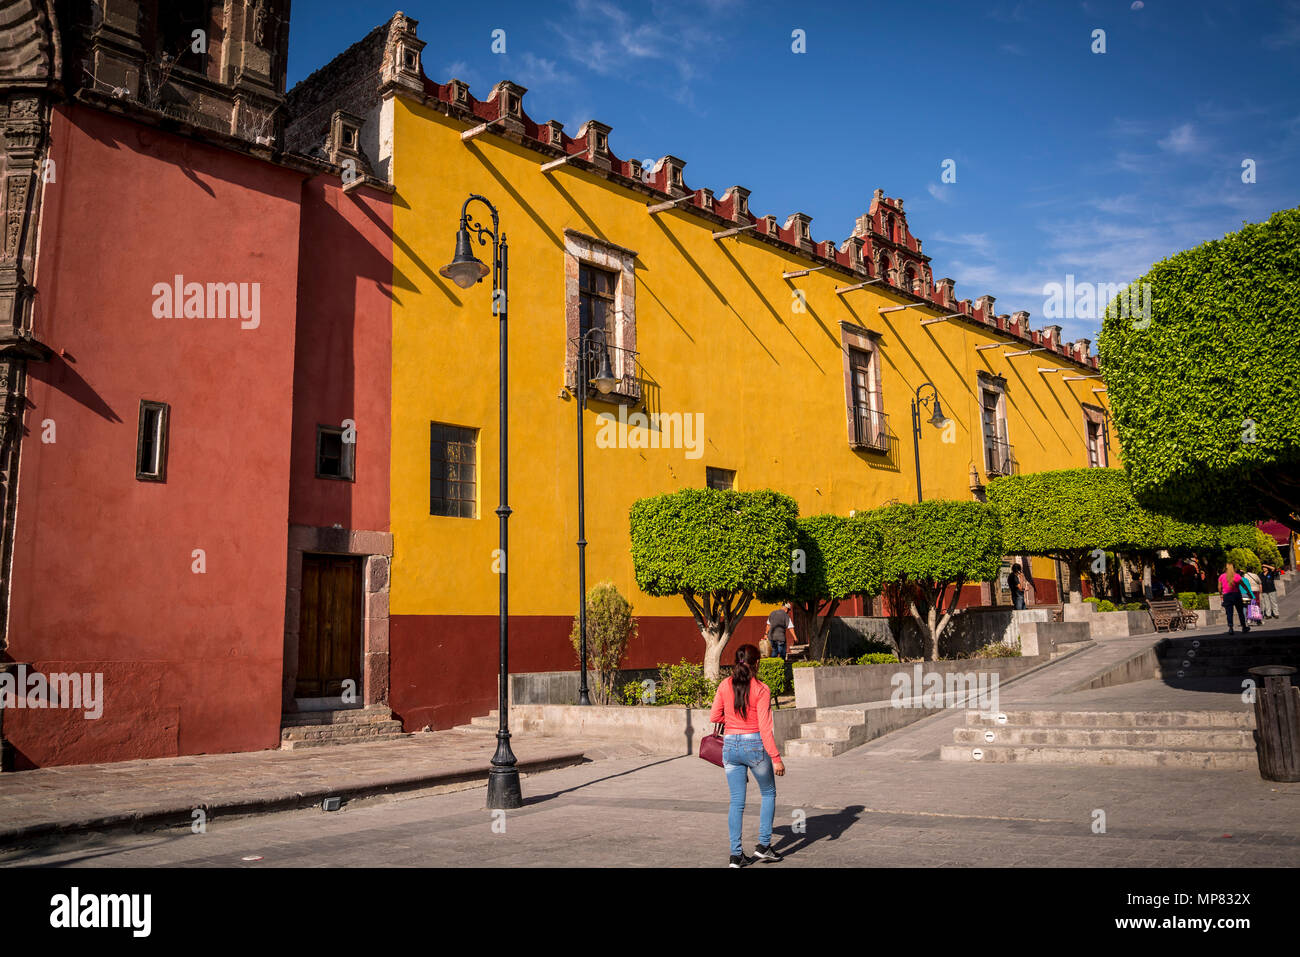 Plaza Civica with typical round shaped trees and University building, San Miguel de Allende, a colonial-era city,  Bajío region, Central Mexico Stock Photo